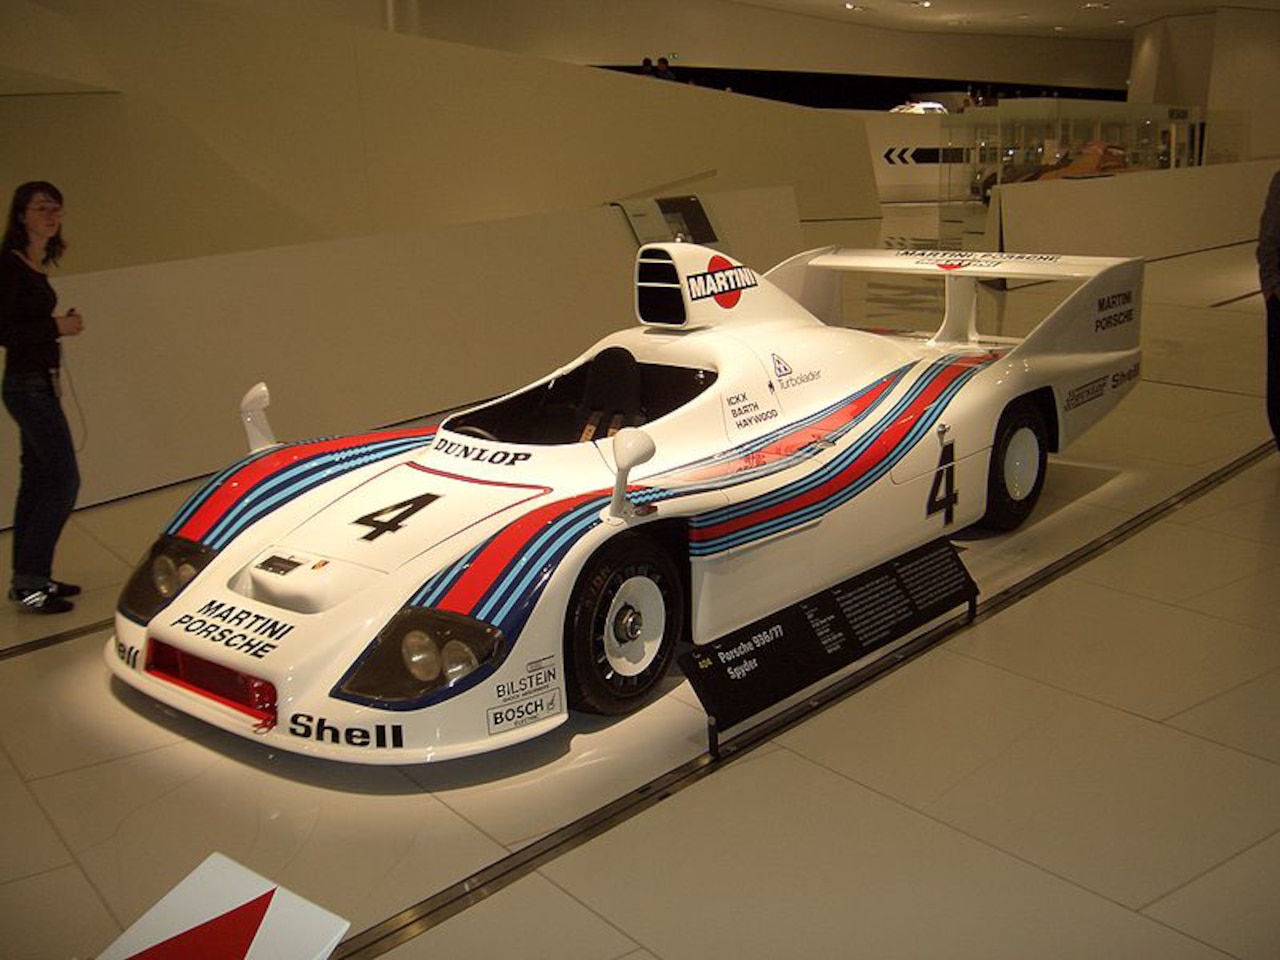 A race car is shown on exhibit.